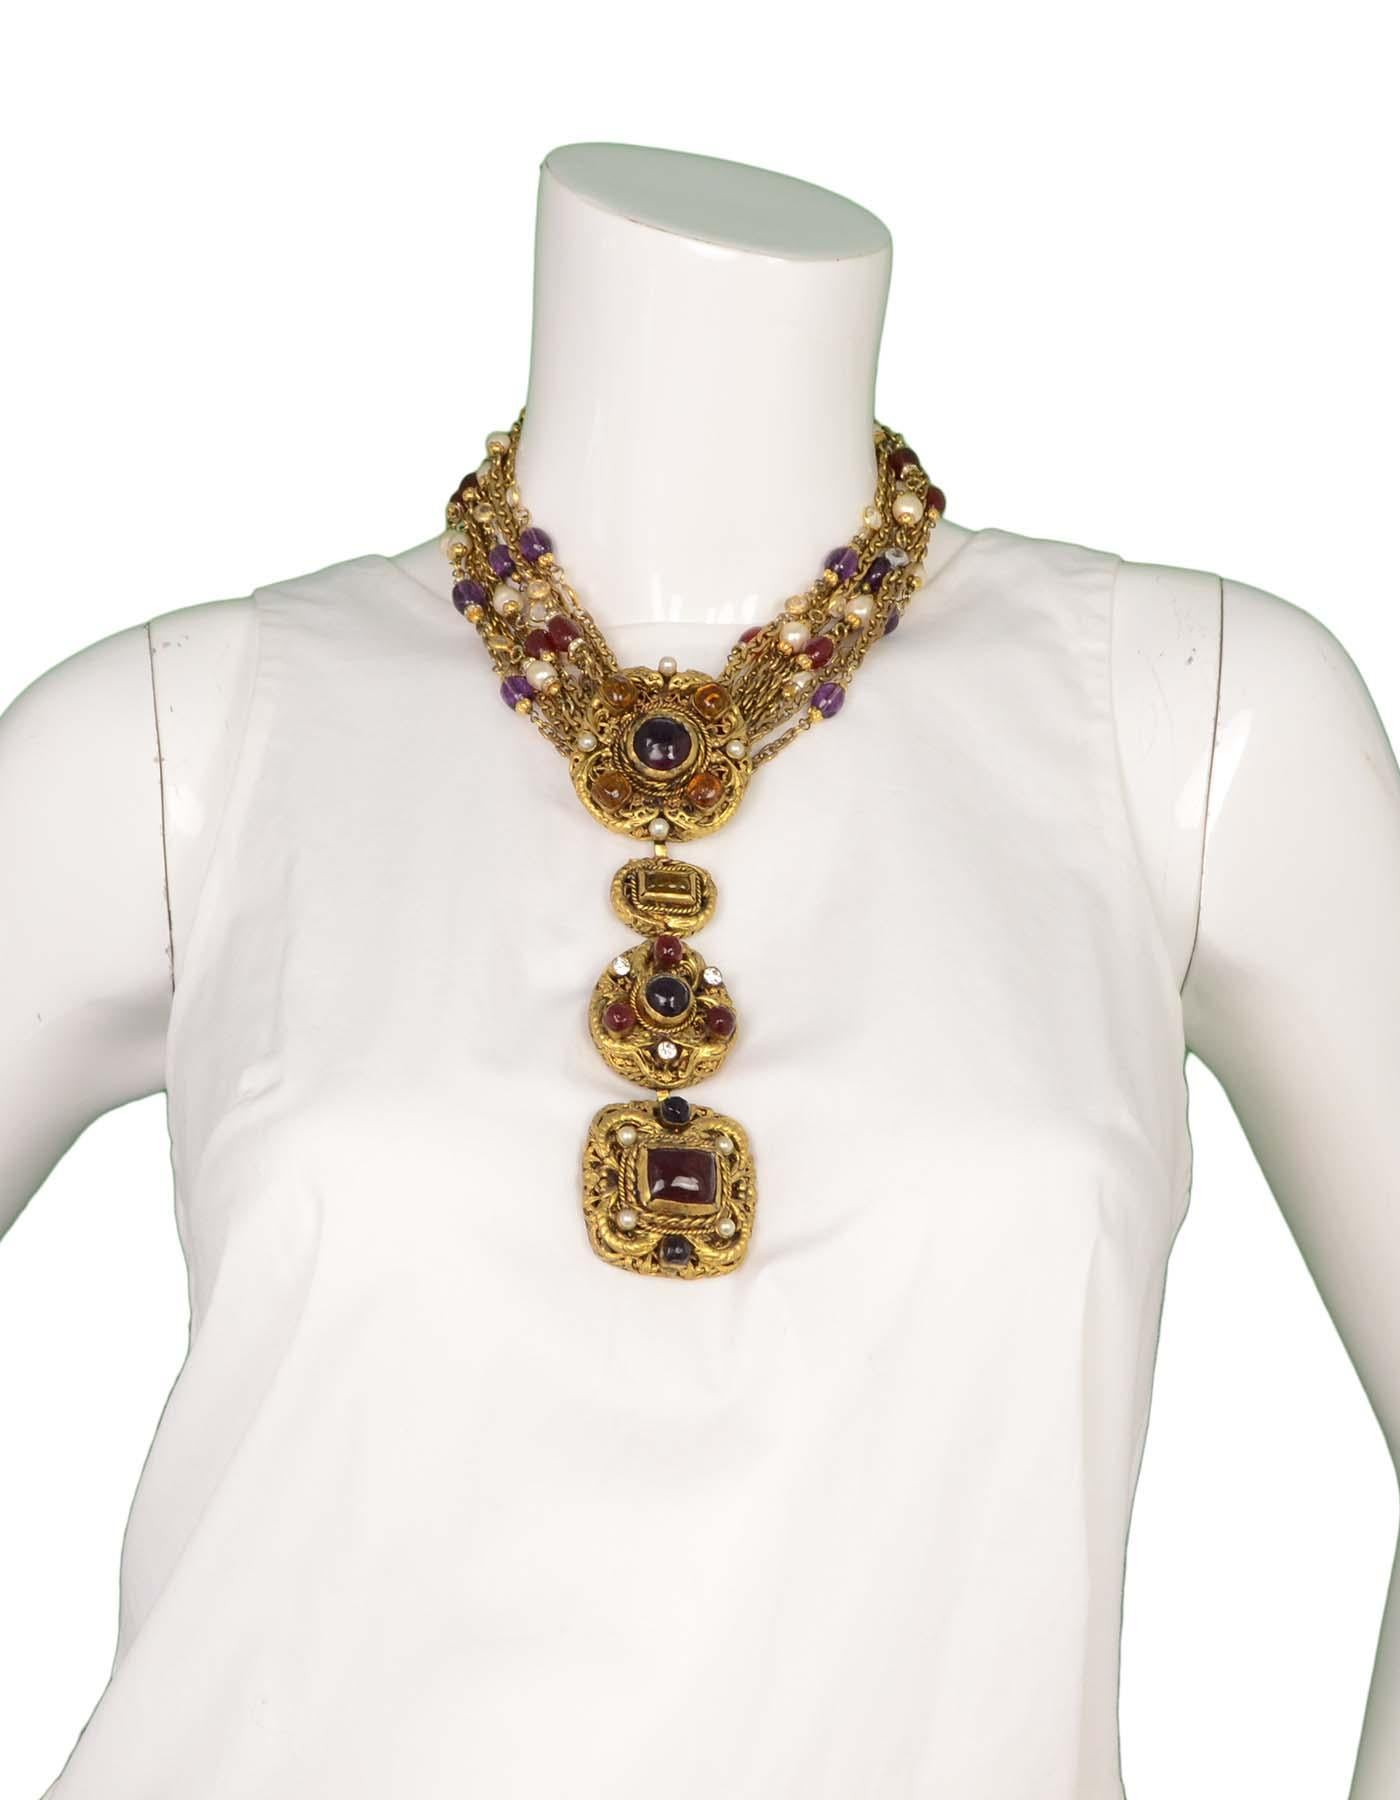 Chanel Vintage '84 Multi-Strand Gripoix & Faux Pearl Medallion Necklace 
Features three detachable medallions with gripoix and faux pearls

Made In: France
Year of Production: 1984
Color: Goldtone, red, purple, orange and ivory
Materials: Metal,